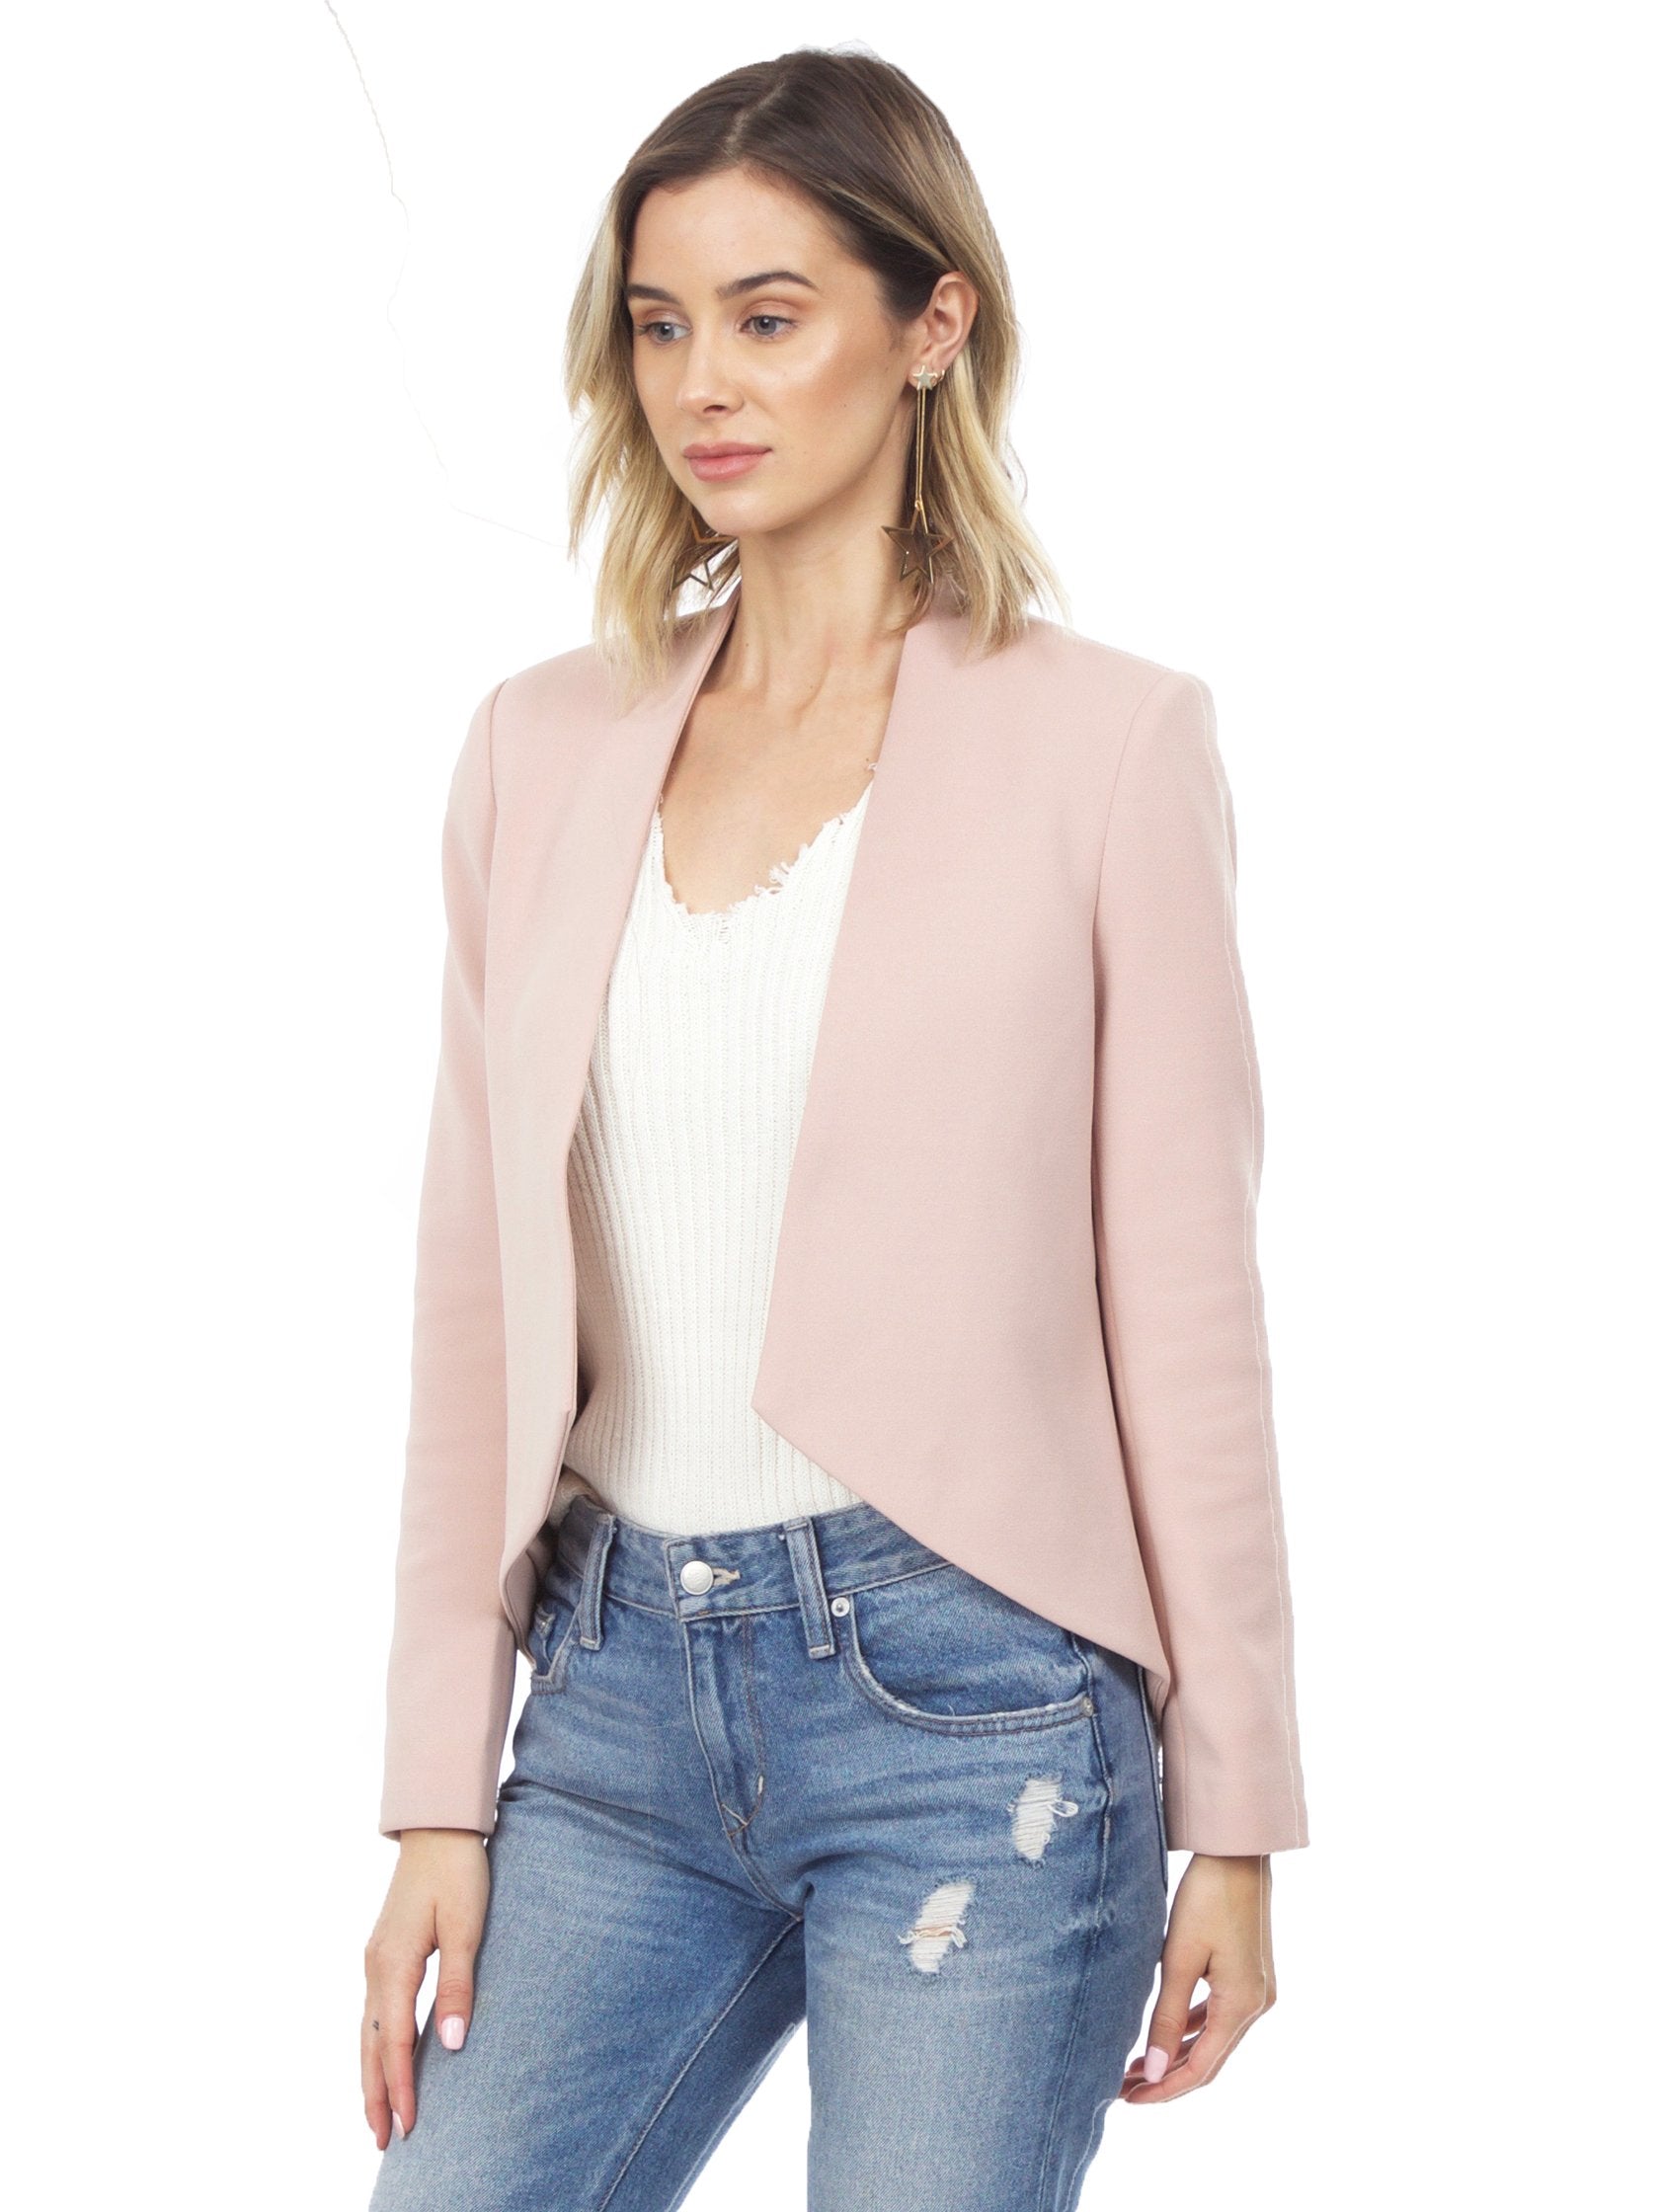 Women wearing a blazer rental from BLAQUE LABEL called Fitted Sculpted Blazer